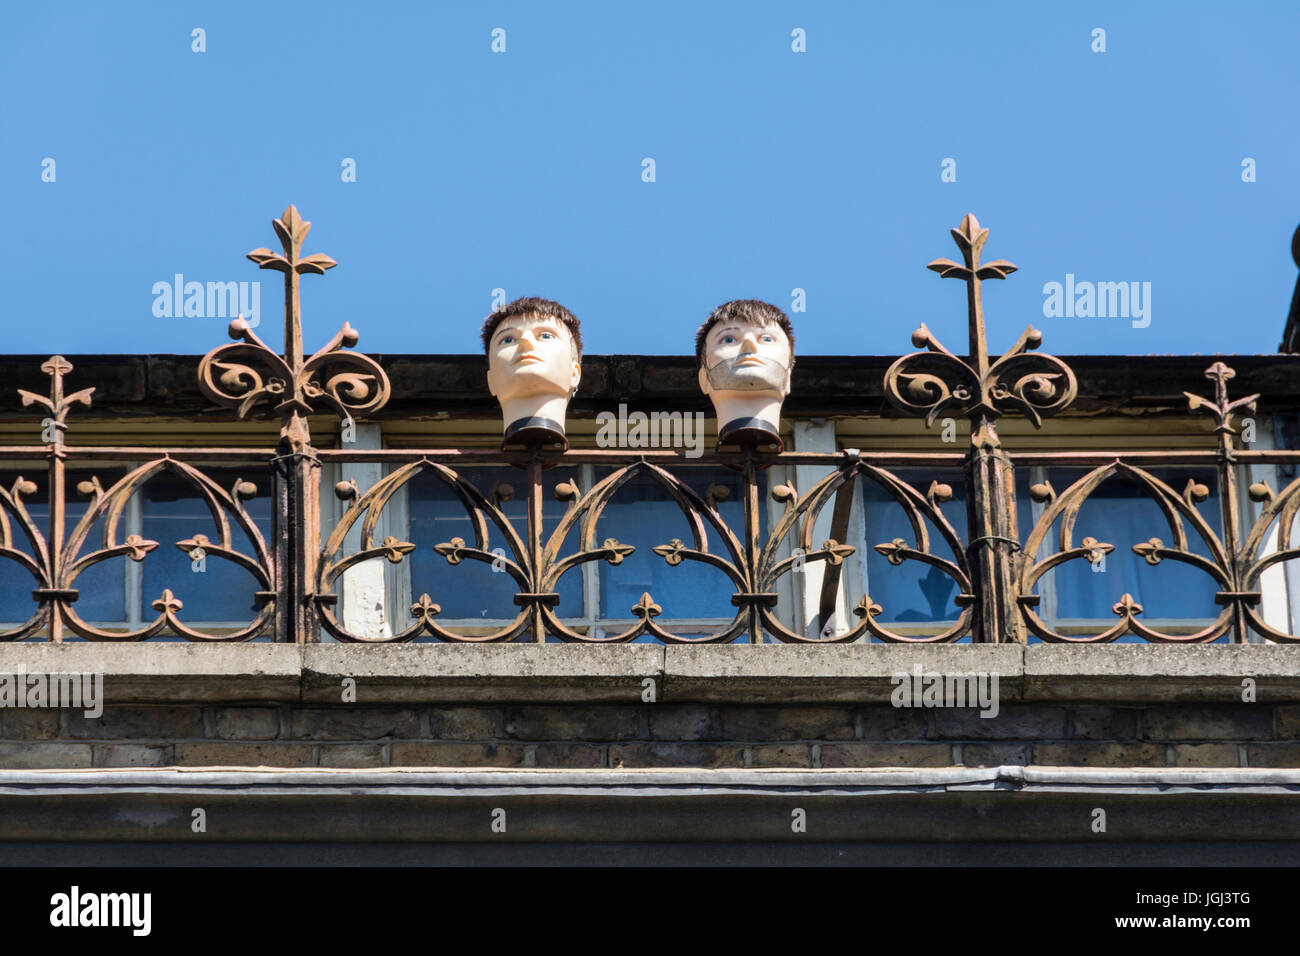 Two severed male mannequin heads impaled on railings on a metal fence Stock Photo